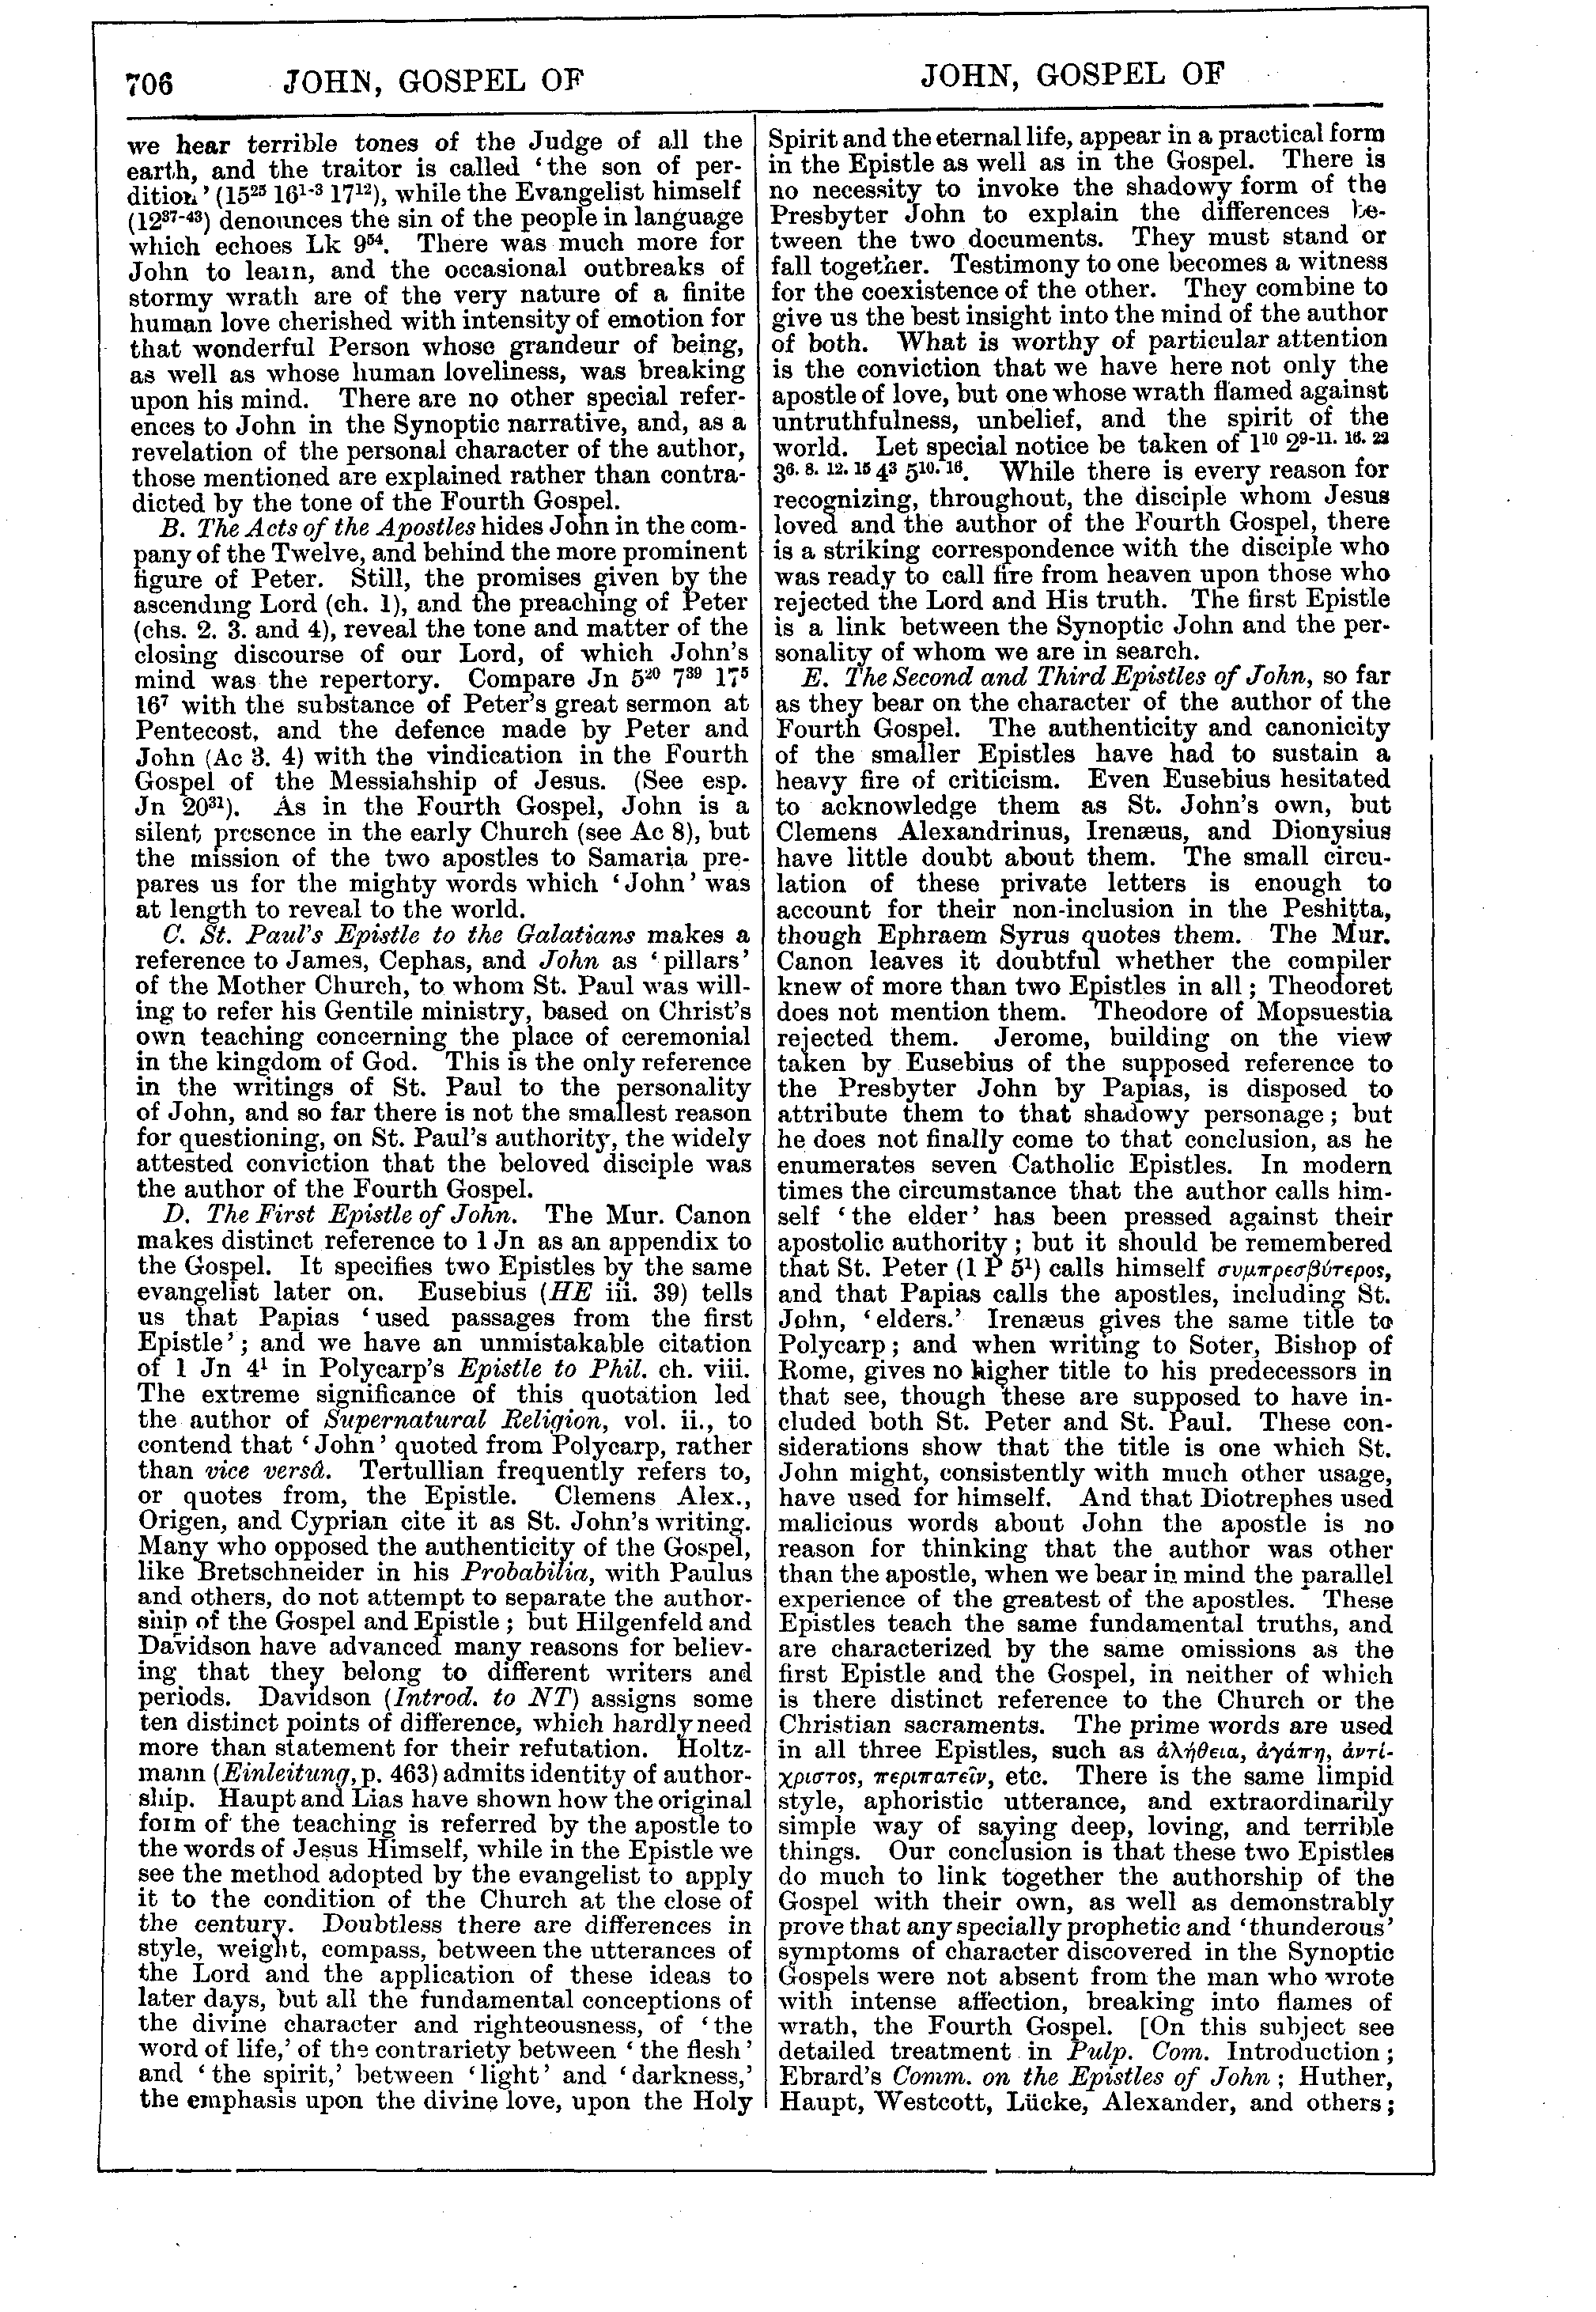 Image of page 706